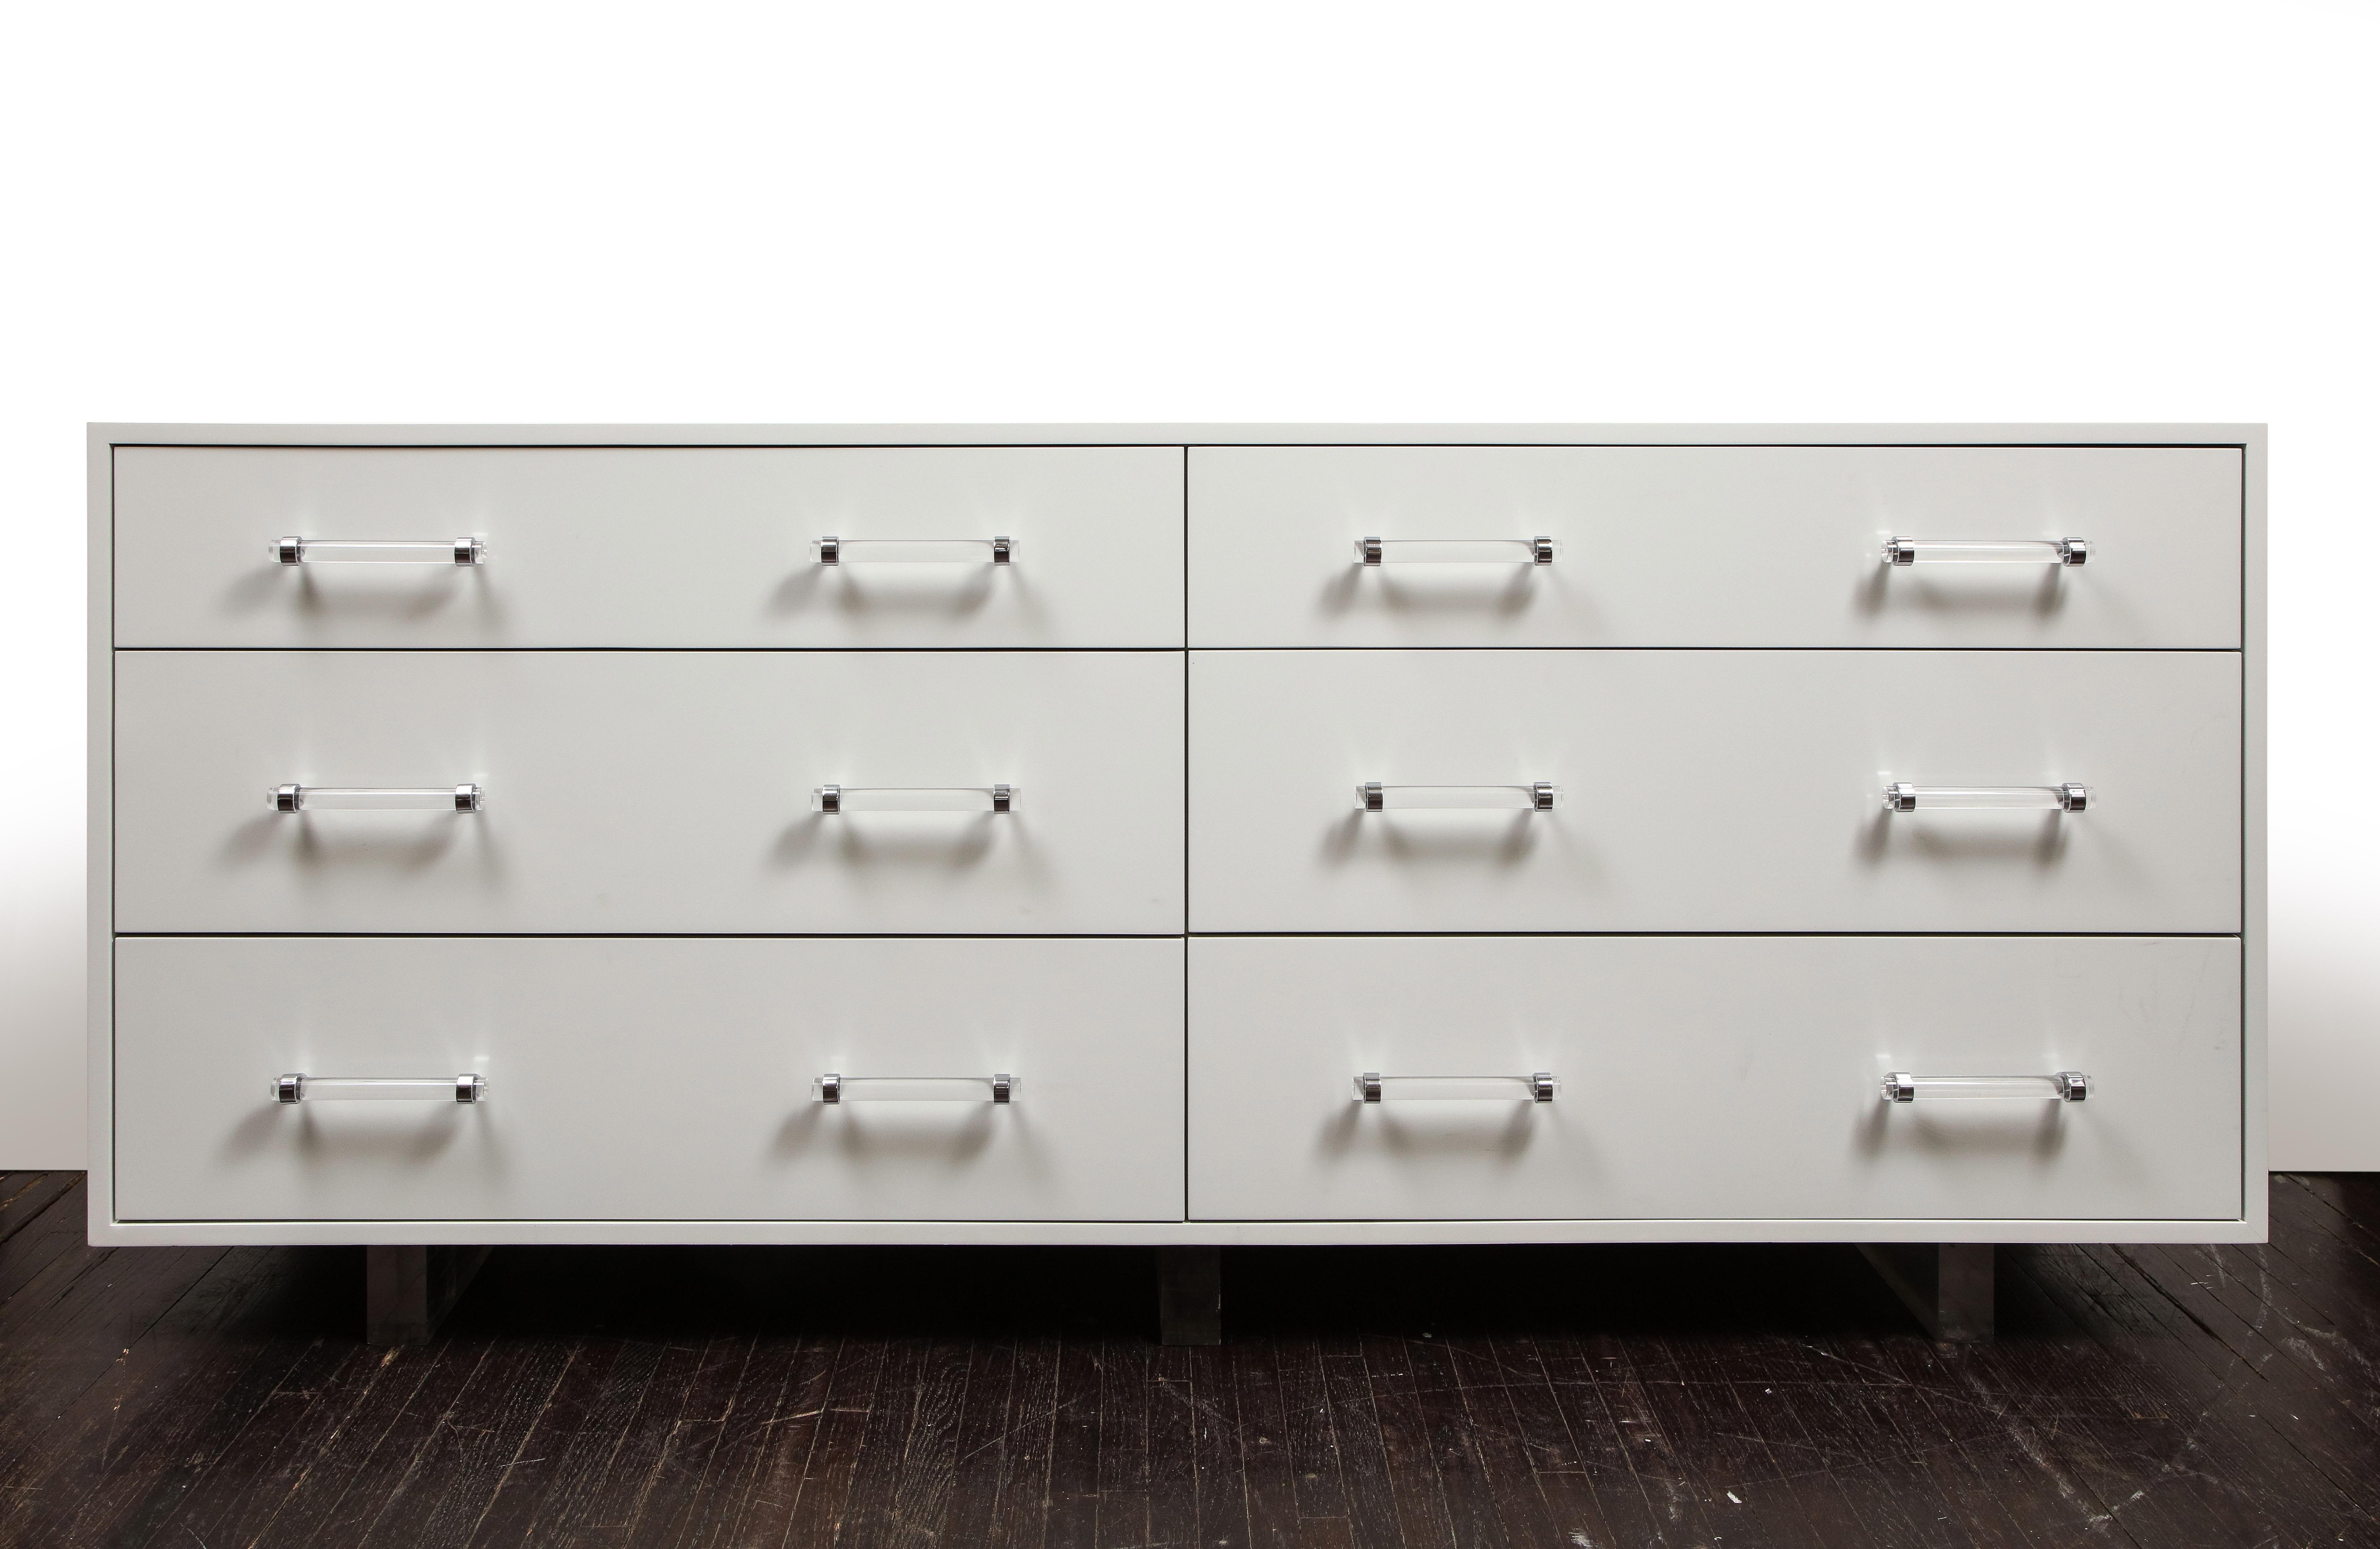 Made to order lacquered 6-drawer dresser on recessed acrylic legs. Shown in white violet color in high gloss finish and acrylic handles in chrome finish. The inside of drawers were finished in the same color as exterior in satin finish. Orders are